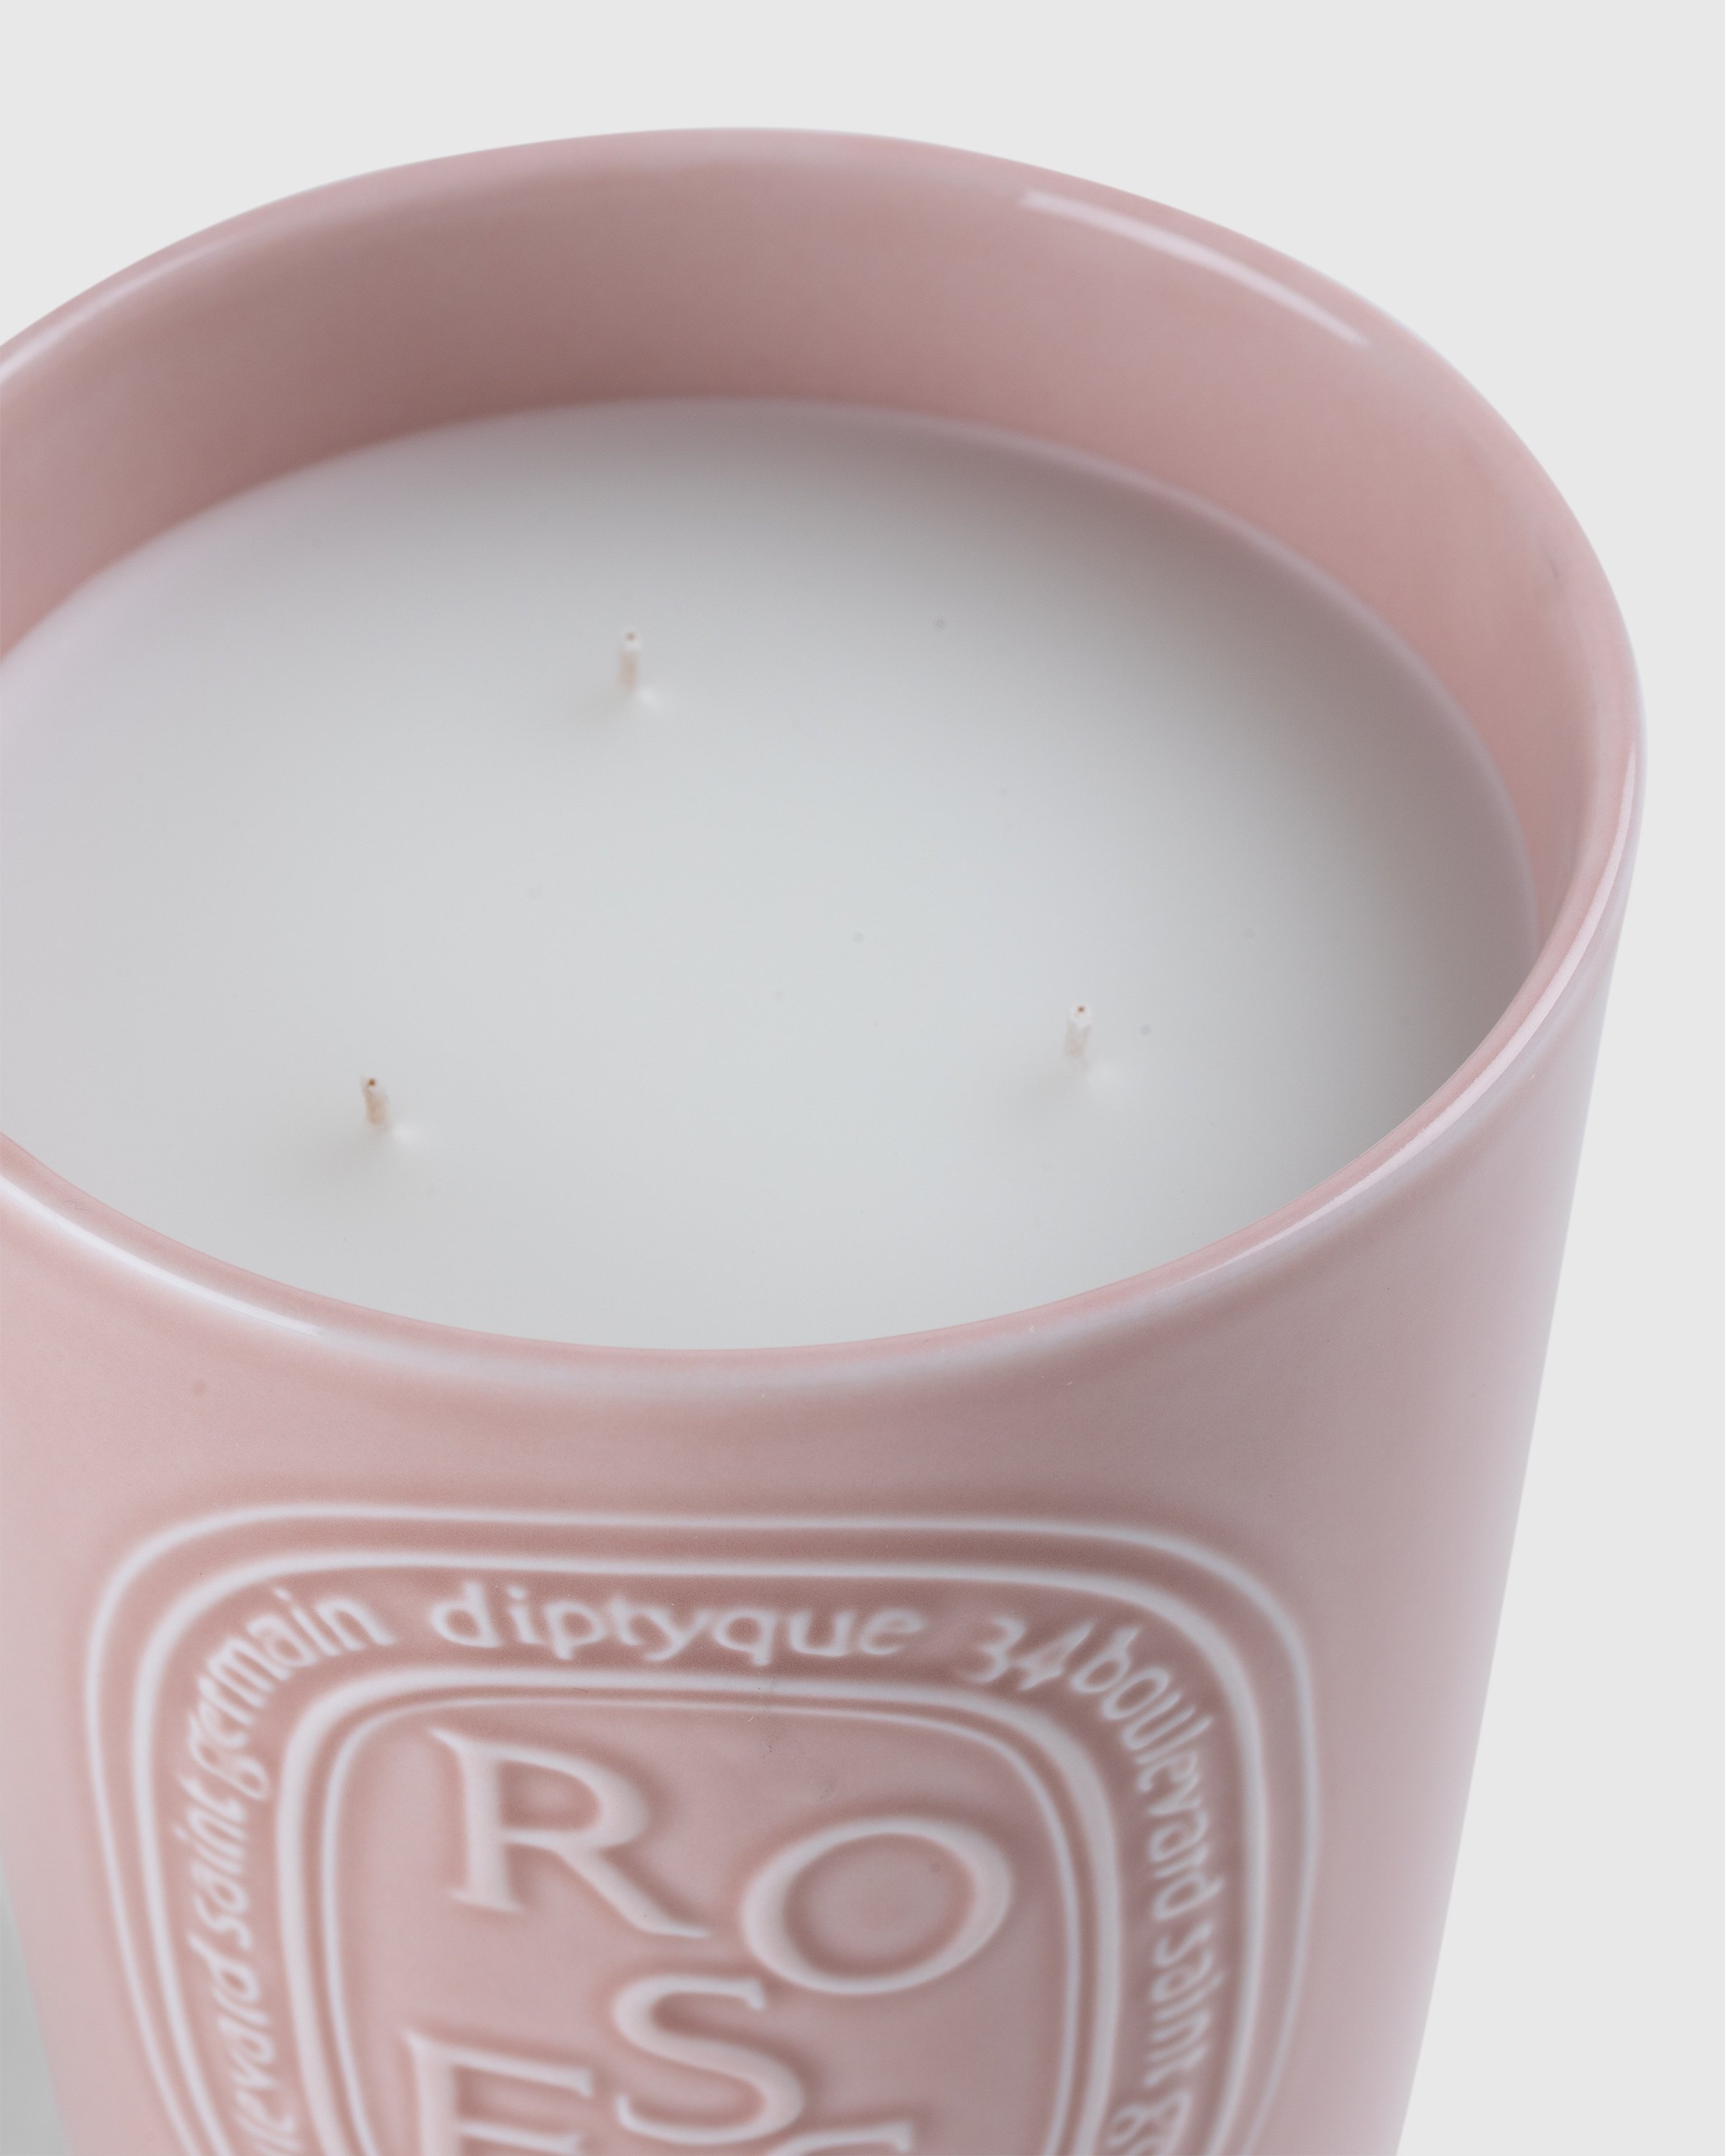 Diptyque - Candle Roses 600g - Lifestyle - Pink - Image 2